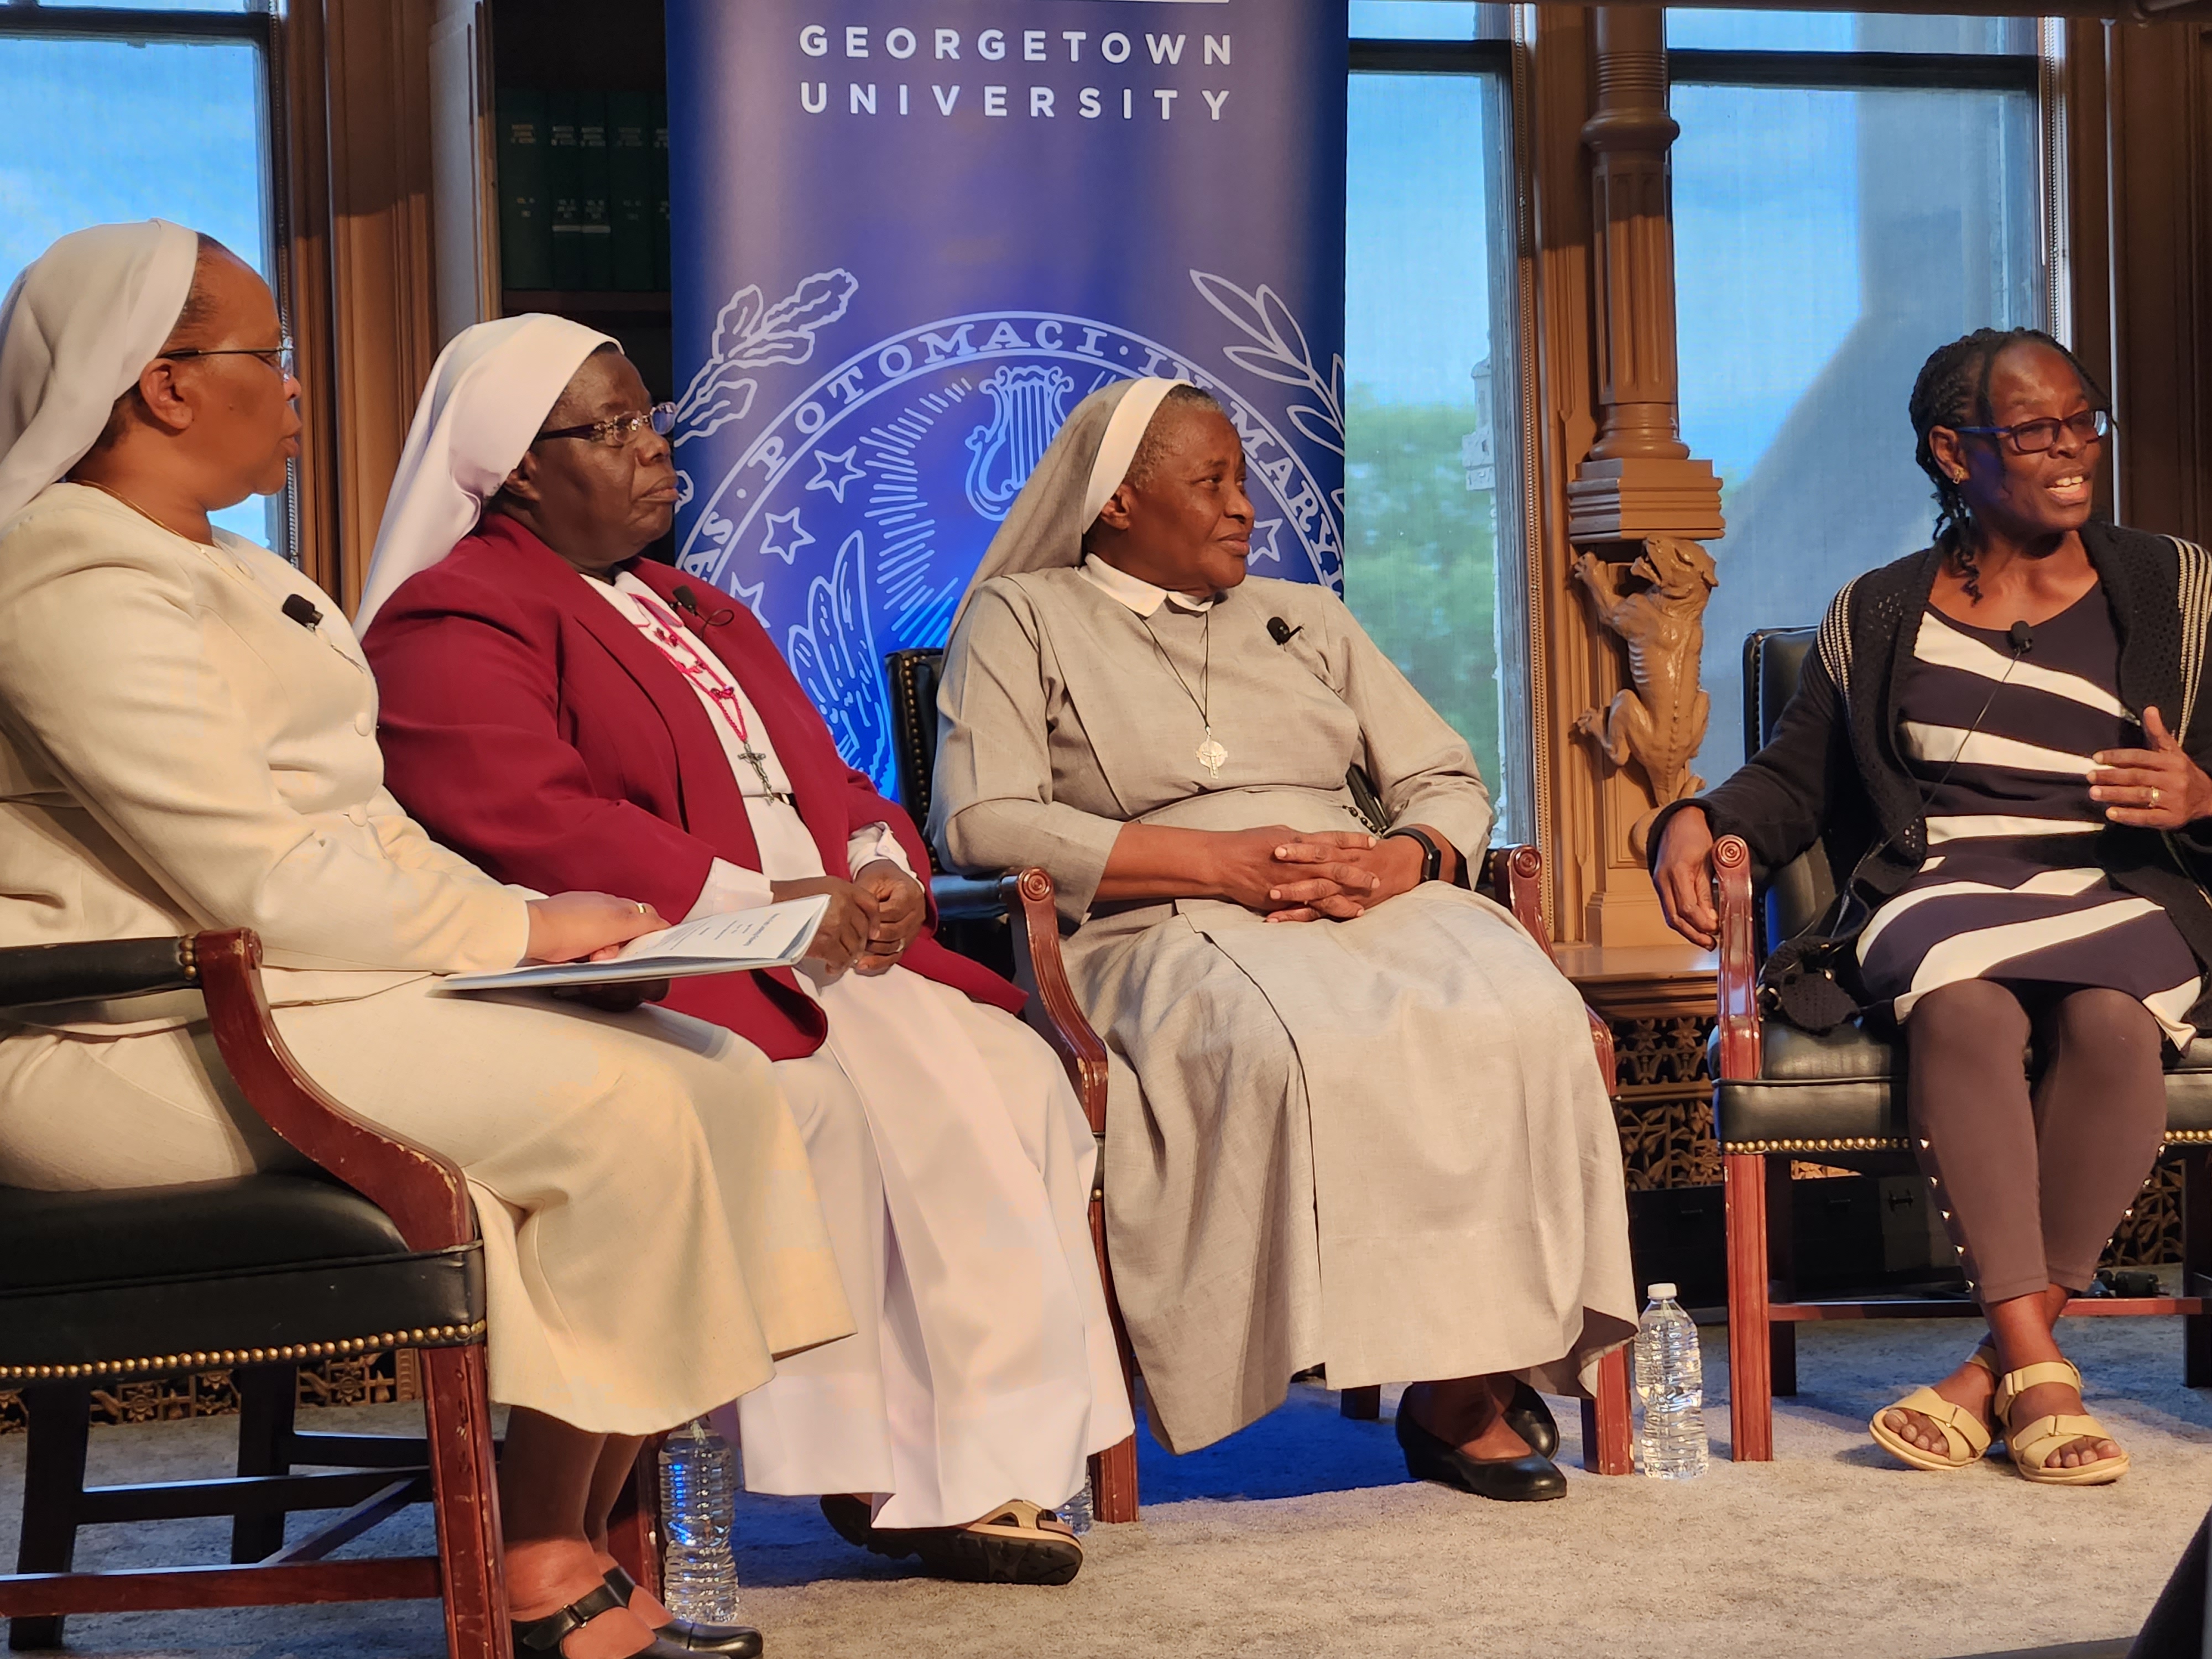 Sr. Josephine Apiagyei, far right, speaks at an April 25 forum at Georgetown University in Washington. The panel also included, from left: Sr. Jane Wakahiu, moderator; Sr. Rosemary Nyirumbe; and Sr. Francisca Ngozi Uti. 